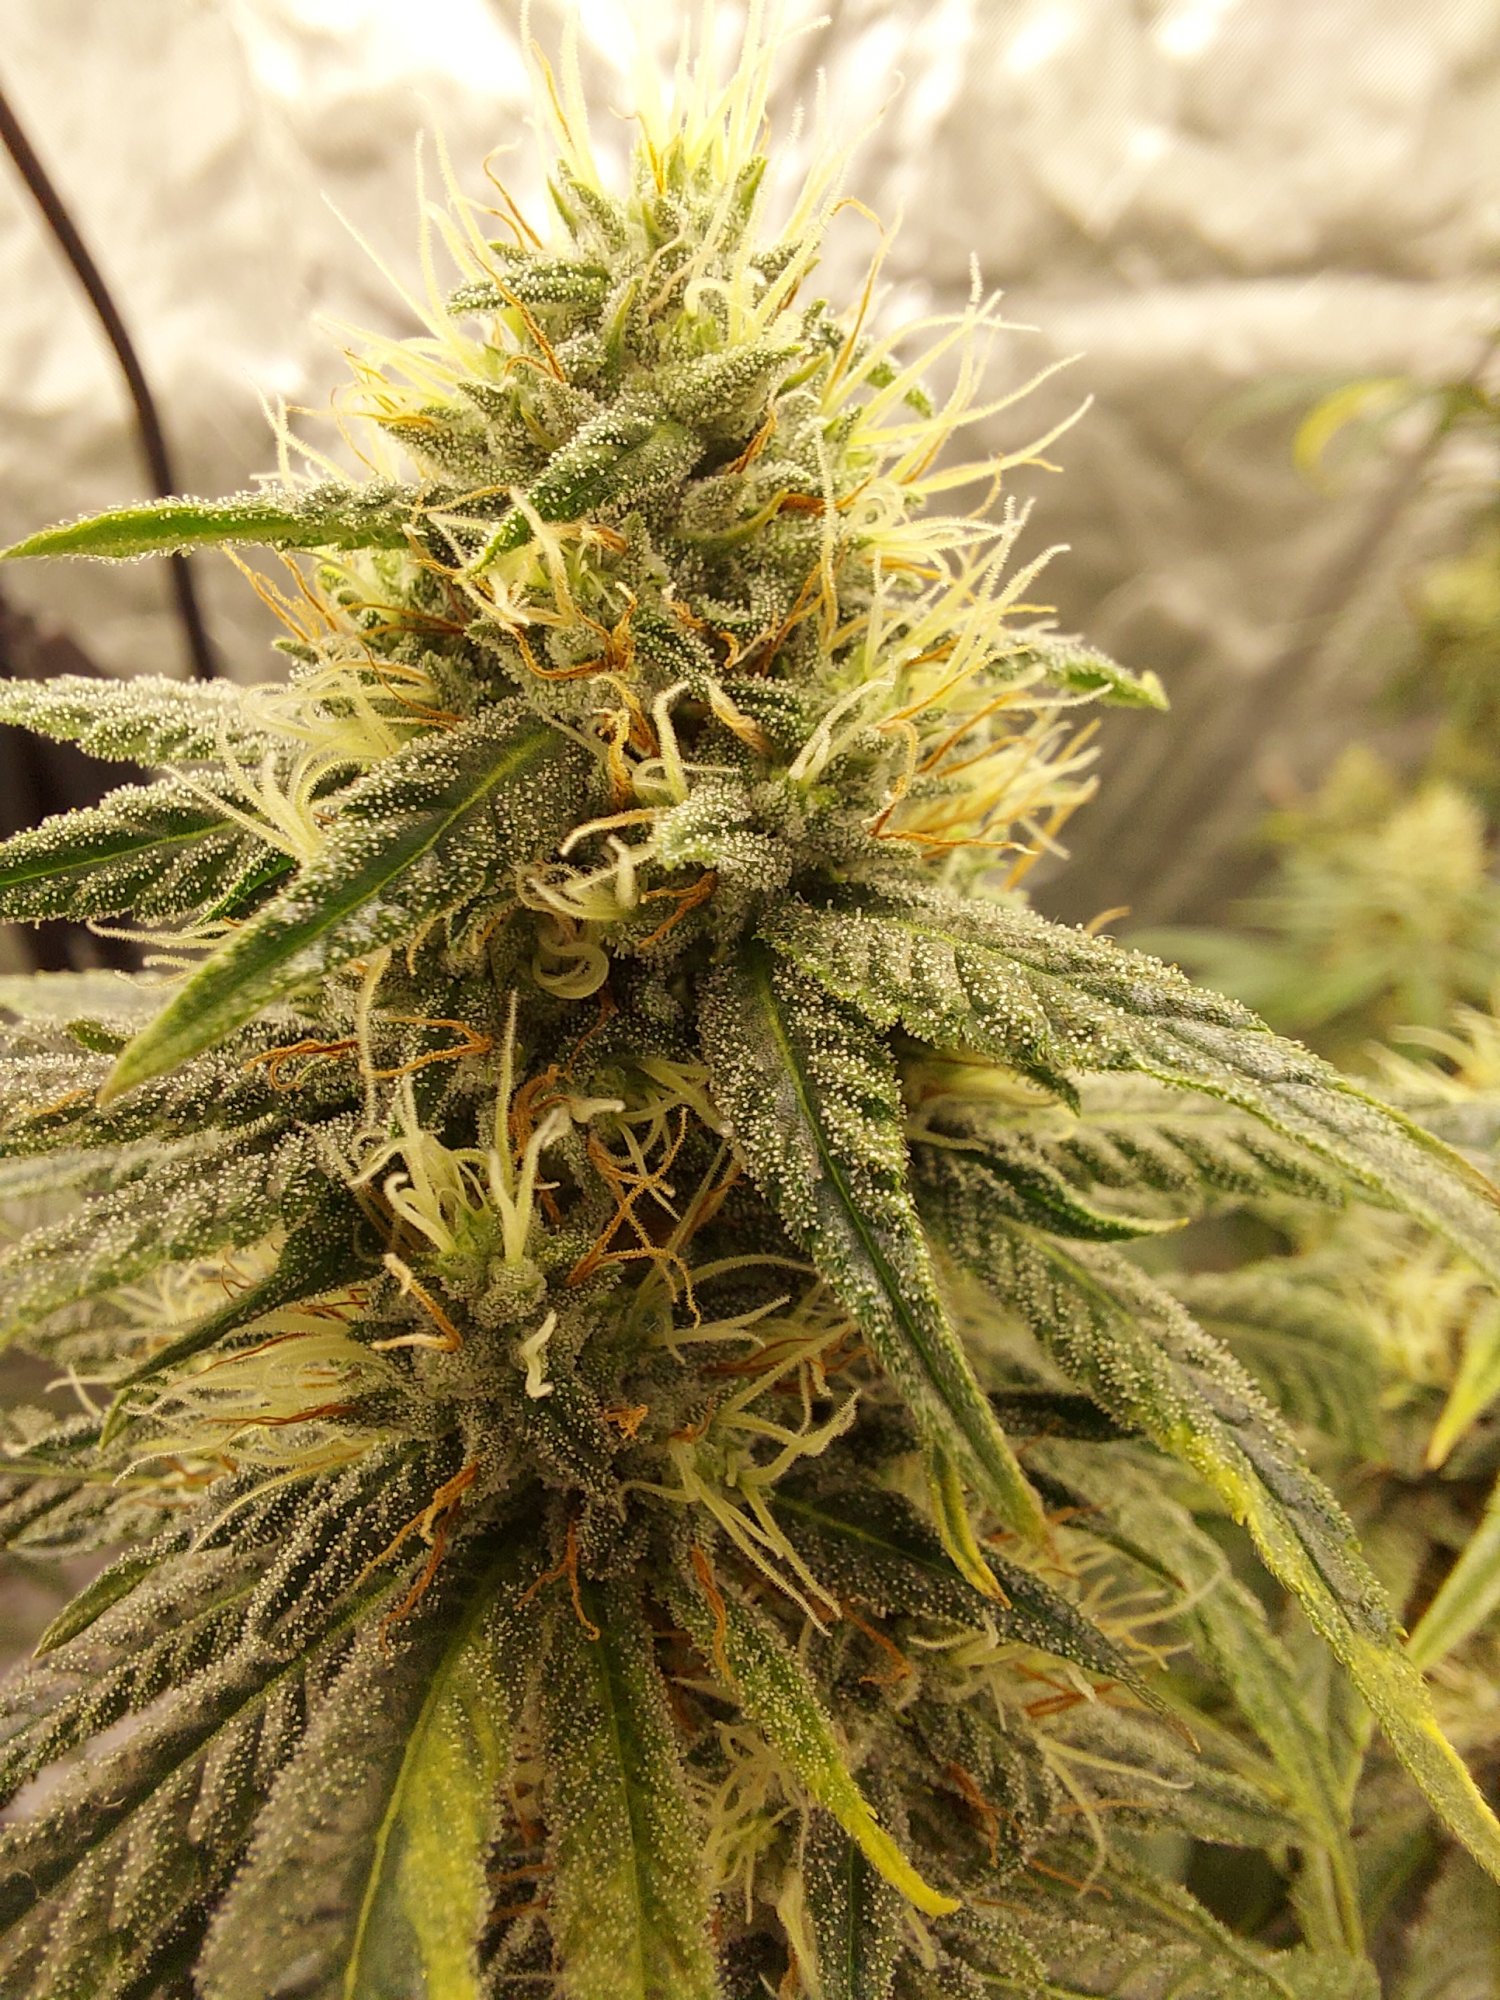 Another week or so away from harvest